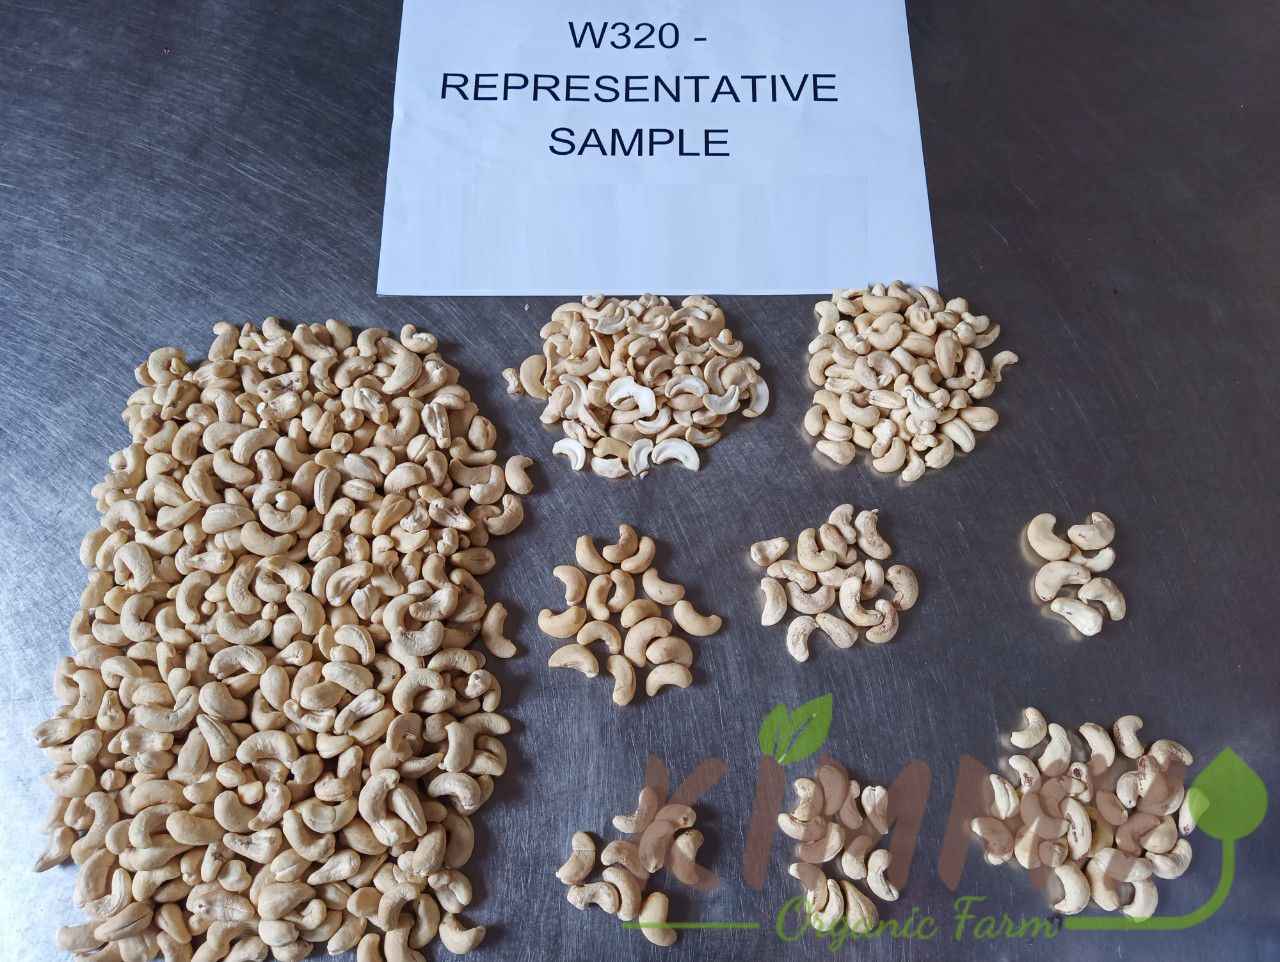 Vietnam W320 Cashew Nut White Whole Cashews High-Quality Ready For Export - Raw image of W320 From Our Cashew Factory! -2